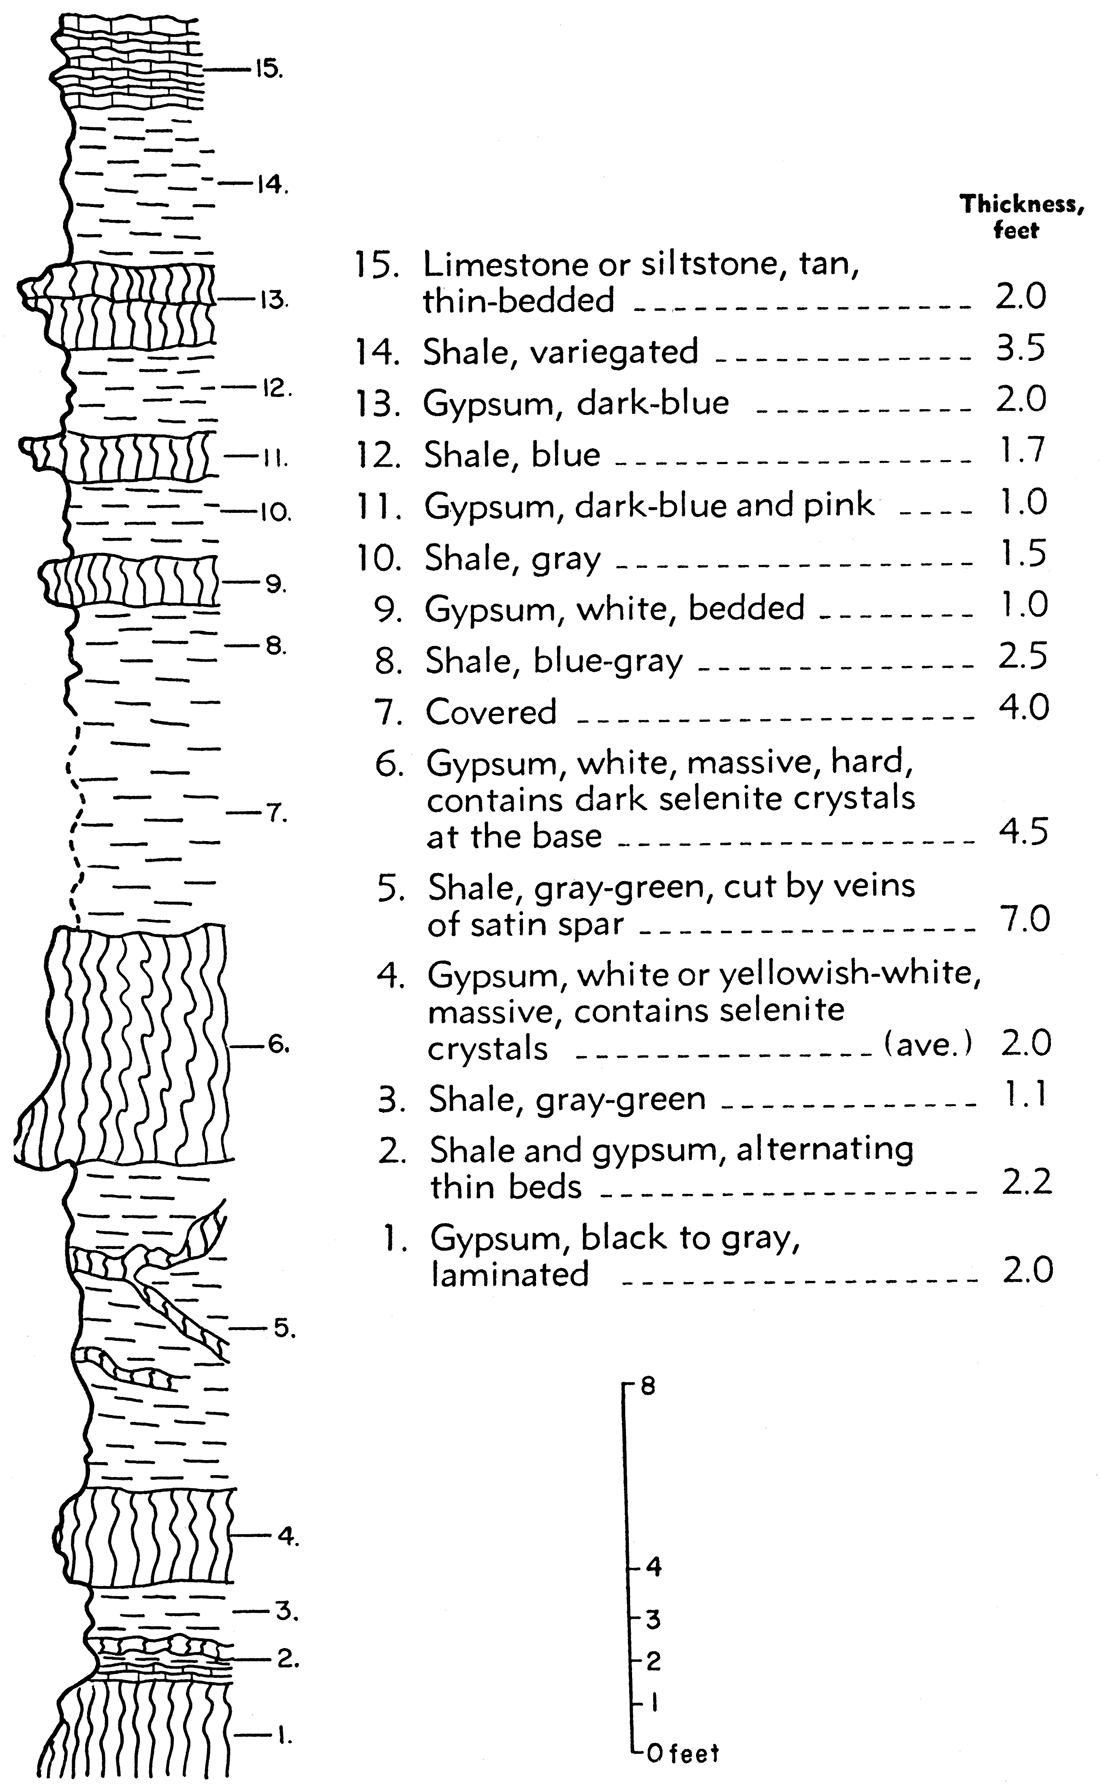 Stratigraphic section of Wellington gypsum exposed on the bank of Gypsum Creek, sec. 3, T. 14 S., R. 1 W.